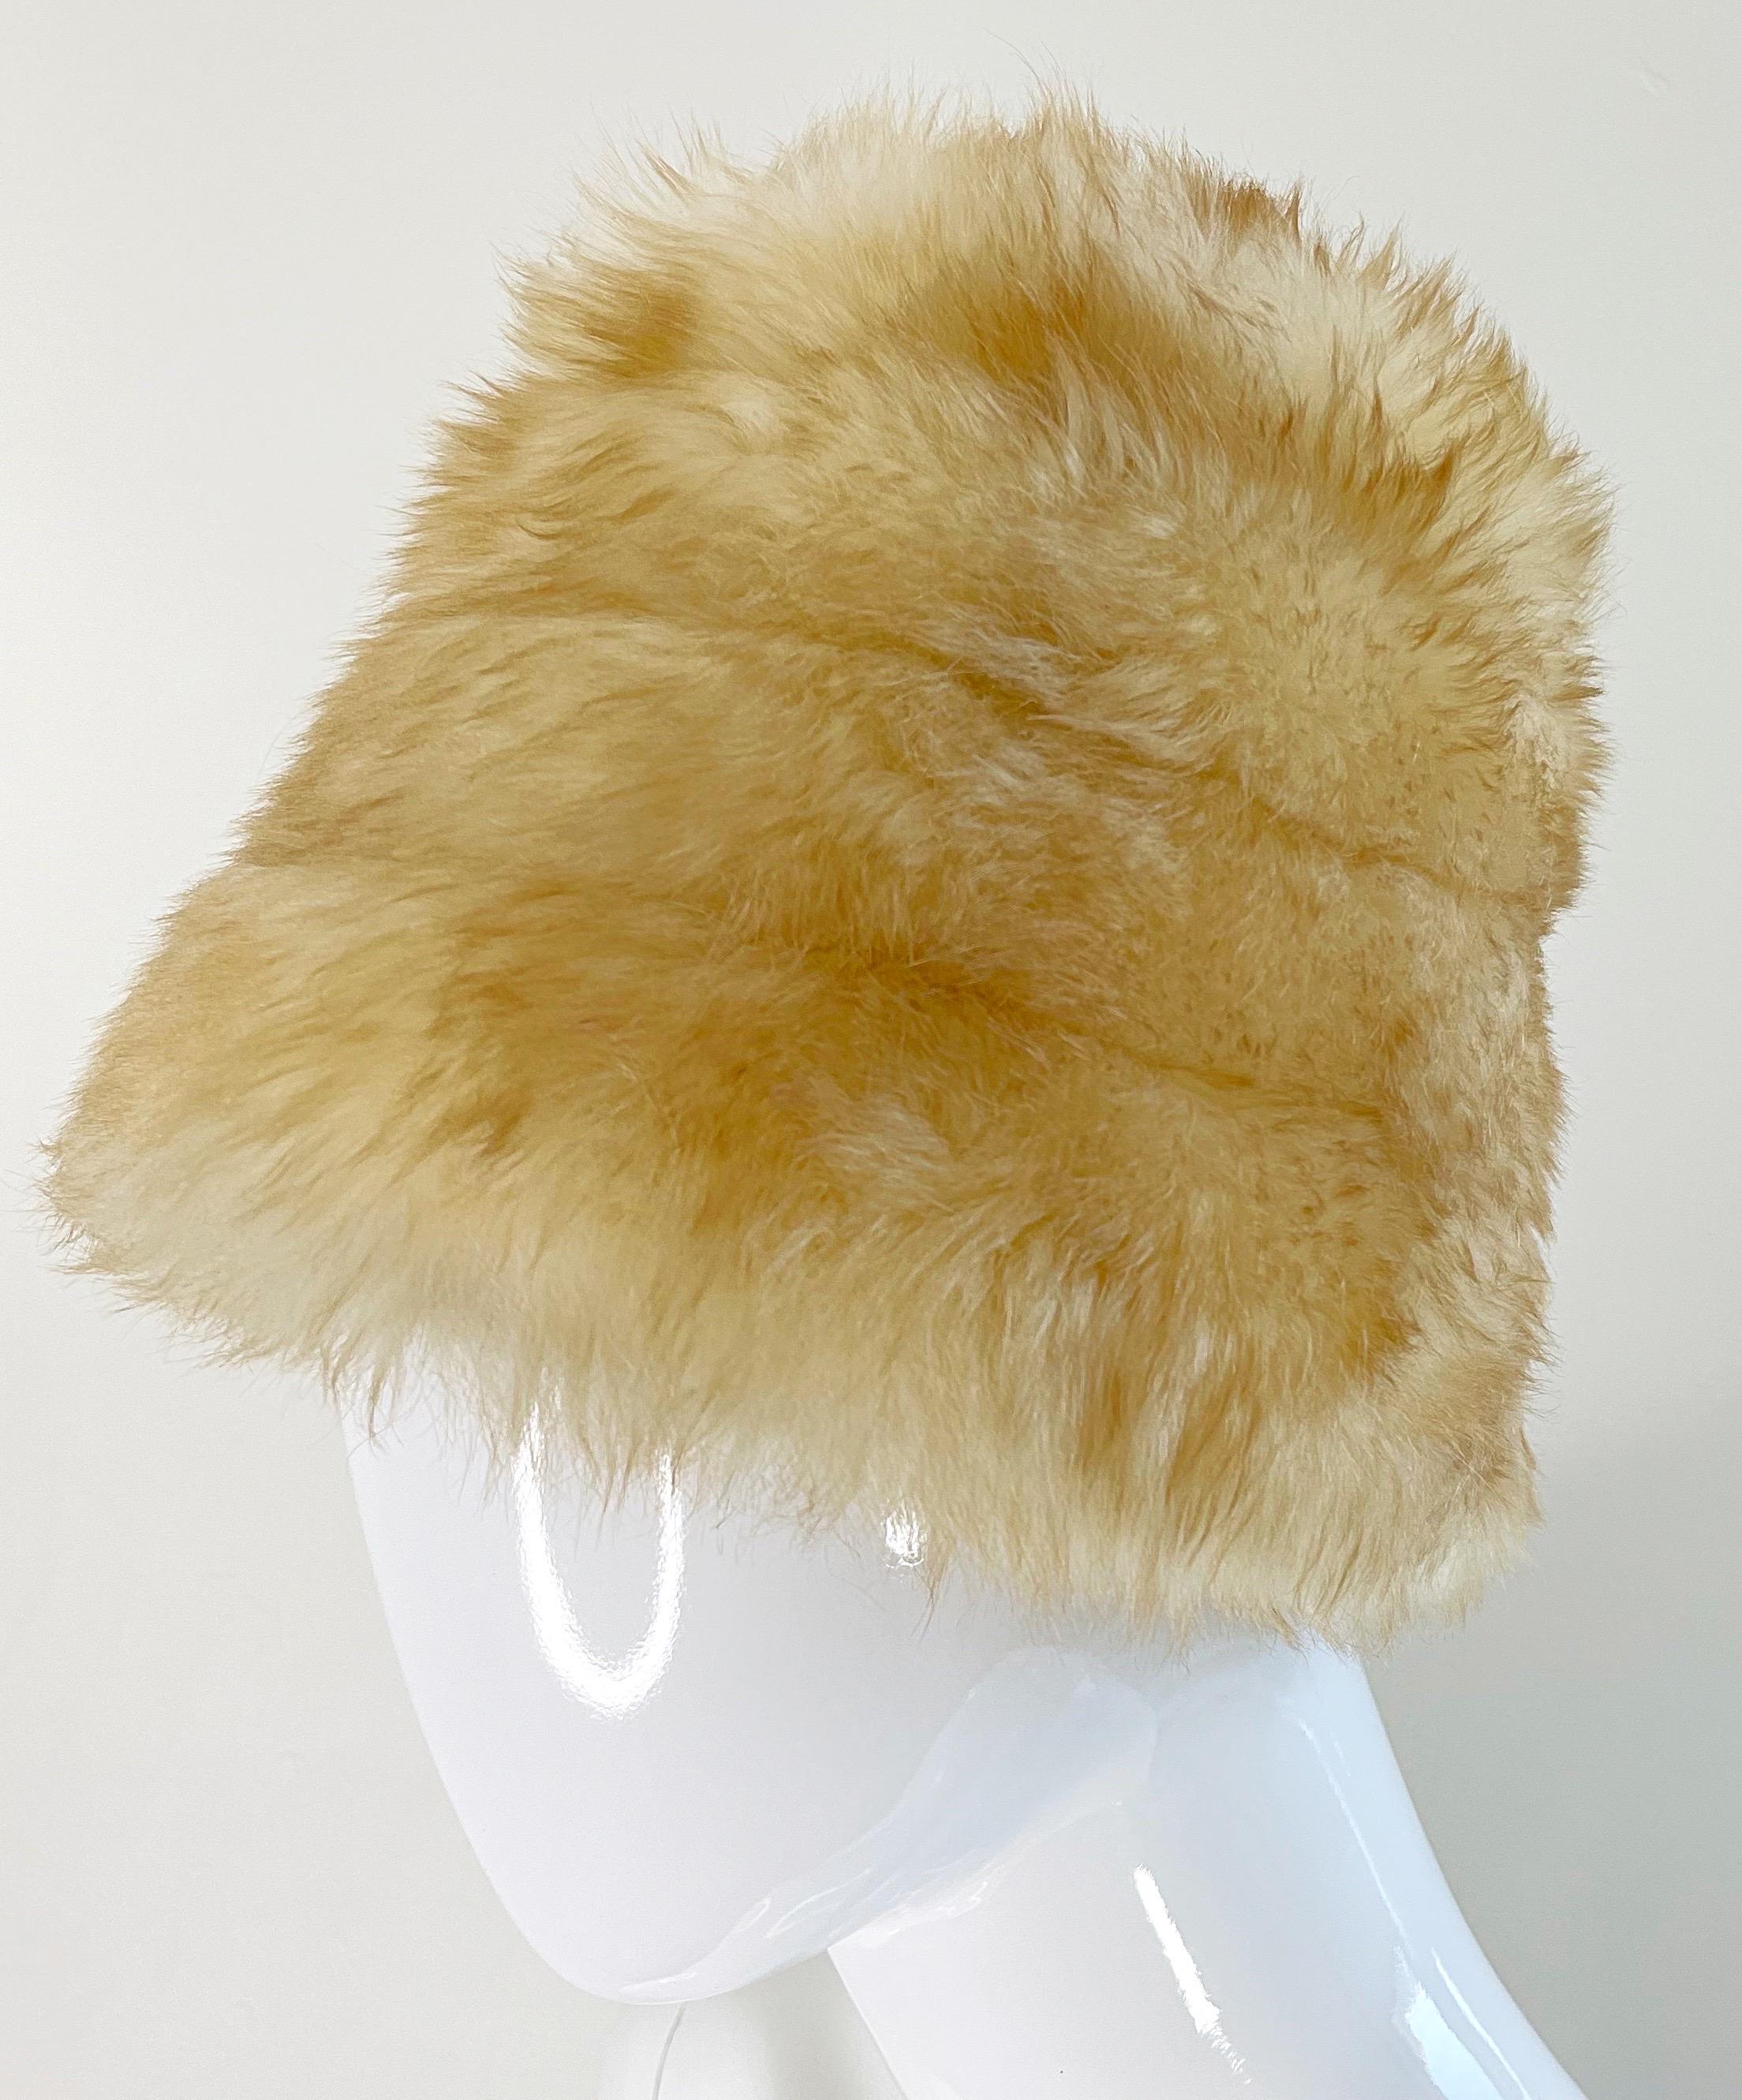 Yves Saint Laurent Fall 1976 Russian Collection Shearling Honey Tan Fur Hat 70s 10